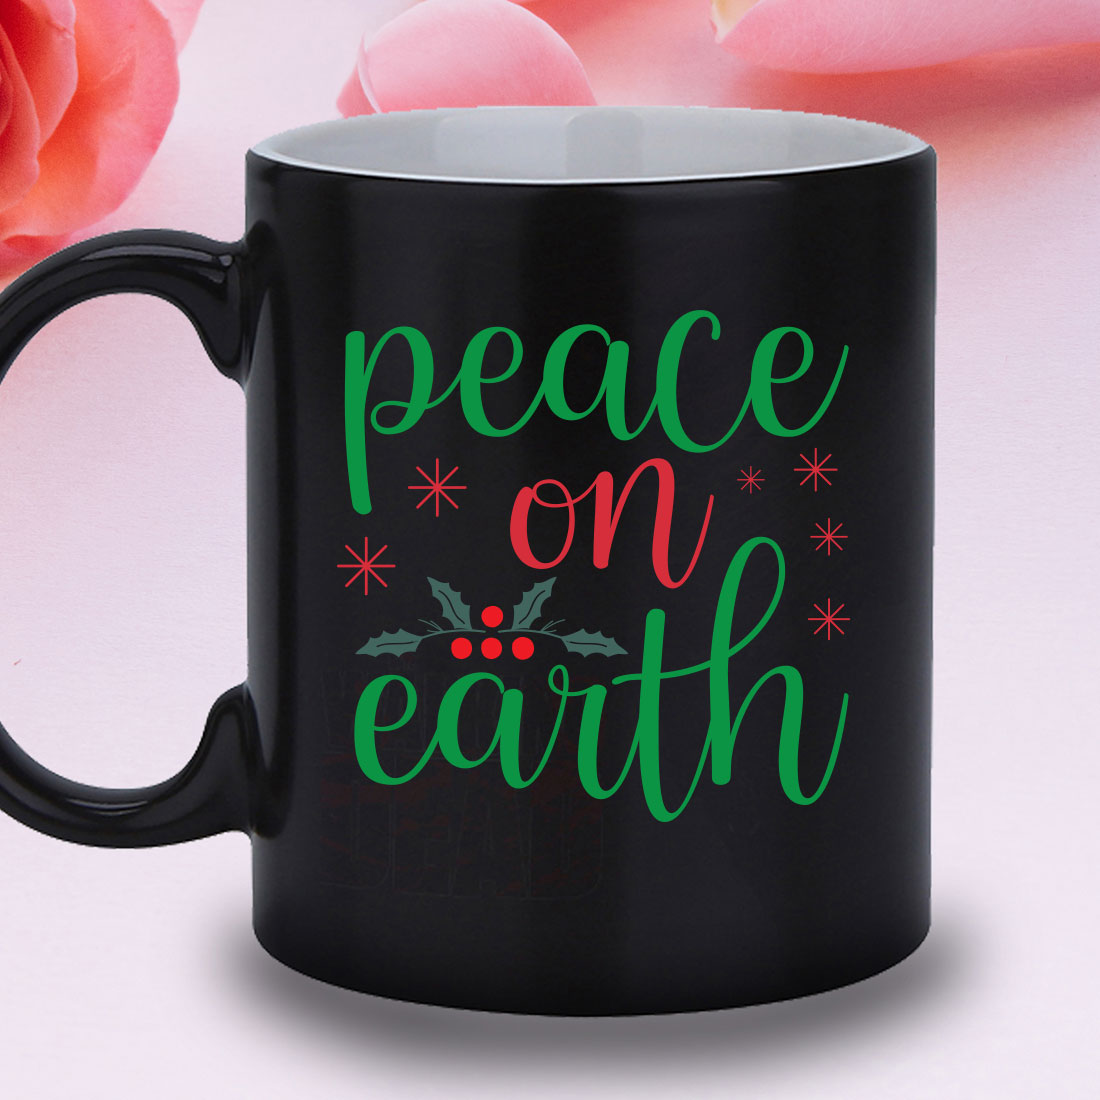 Black coffee mug with the words peace on earth printed on it.